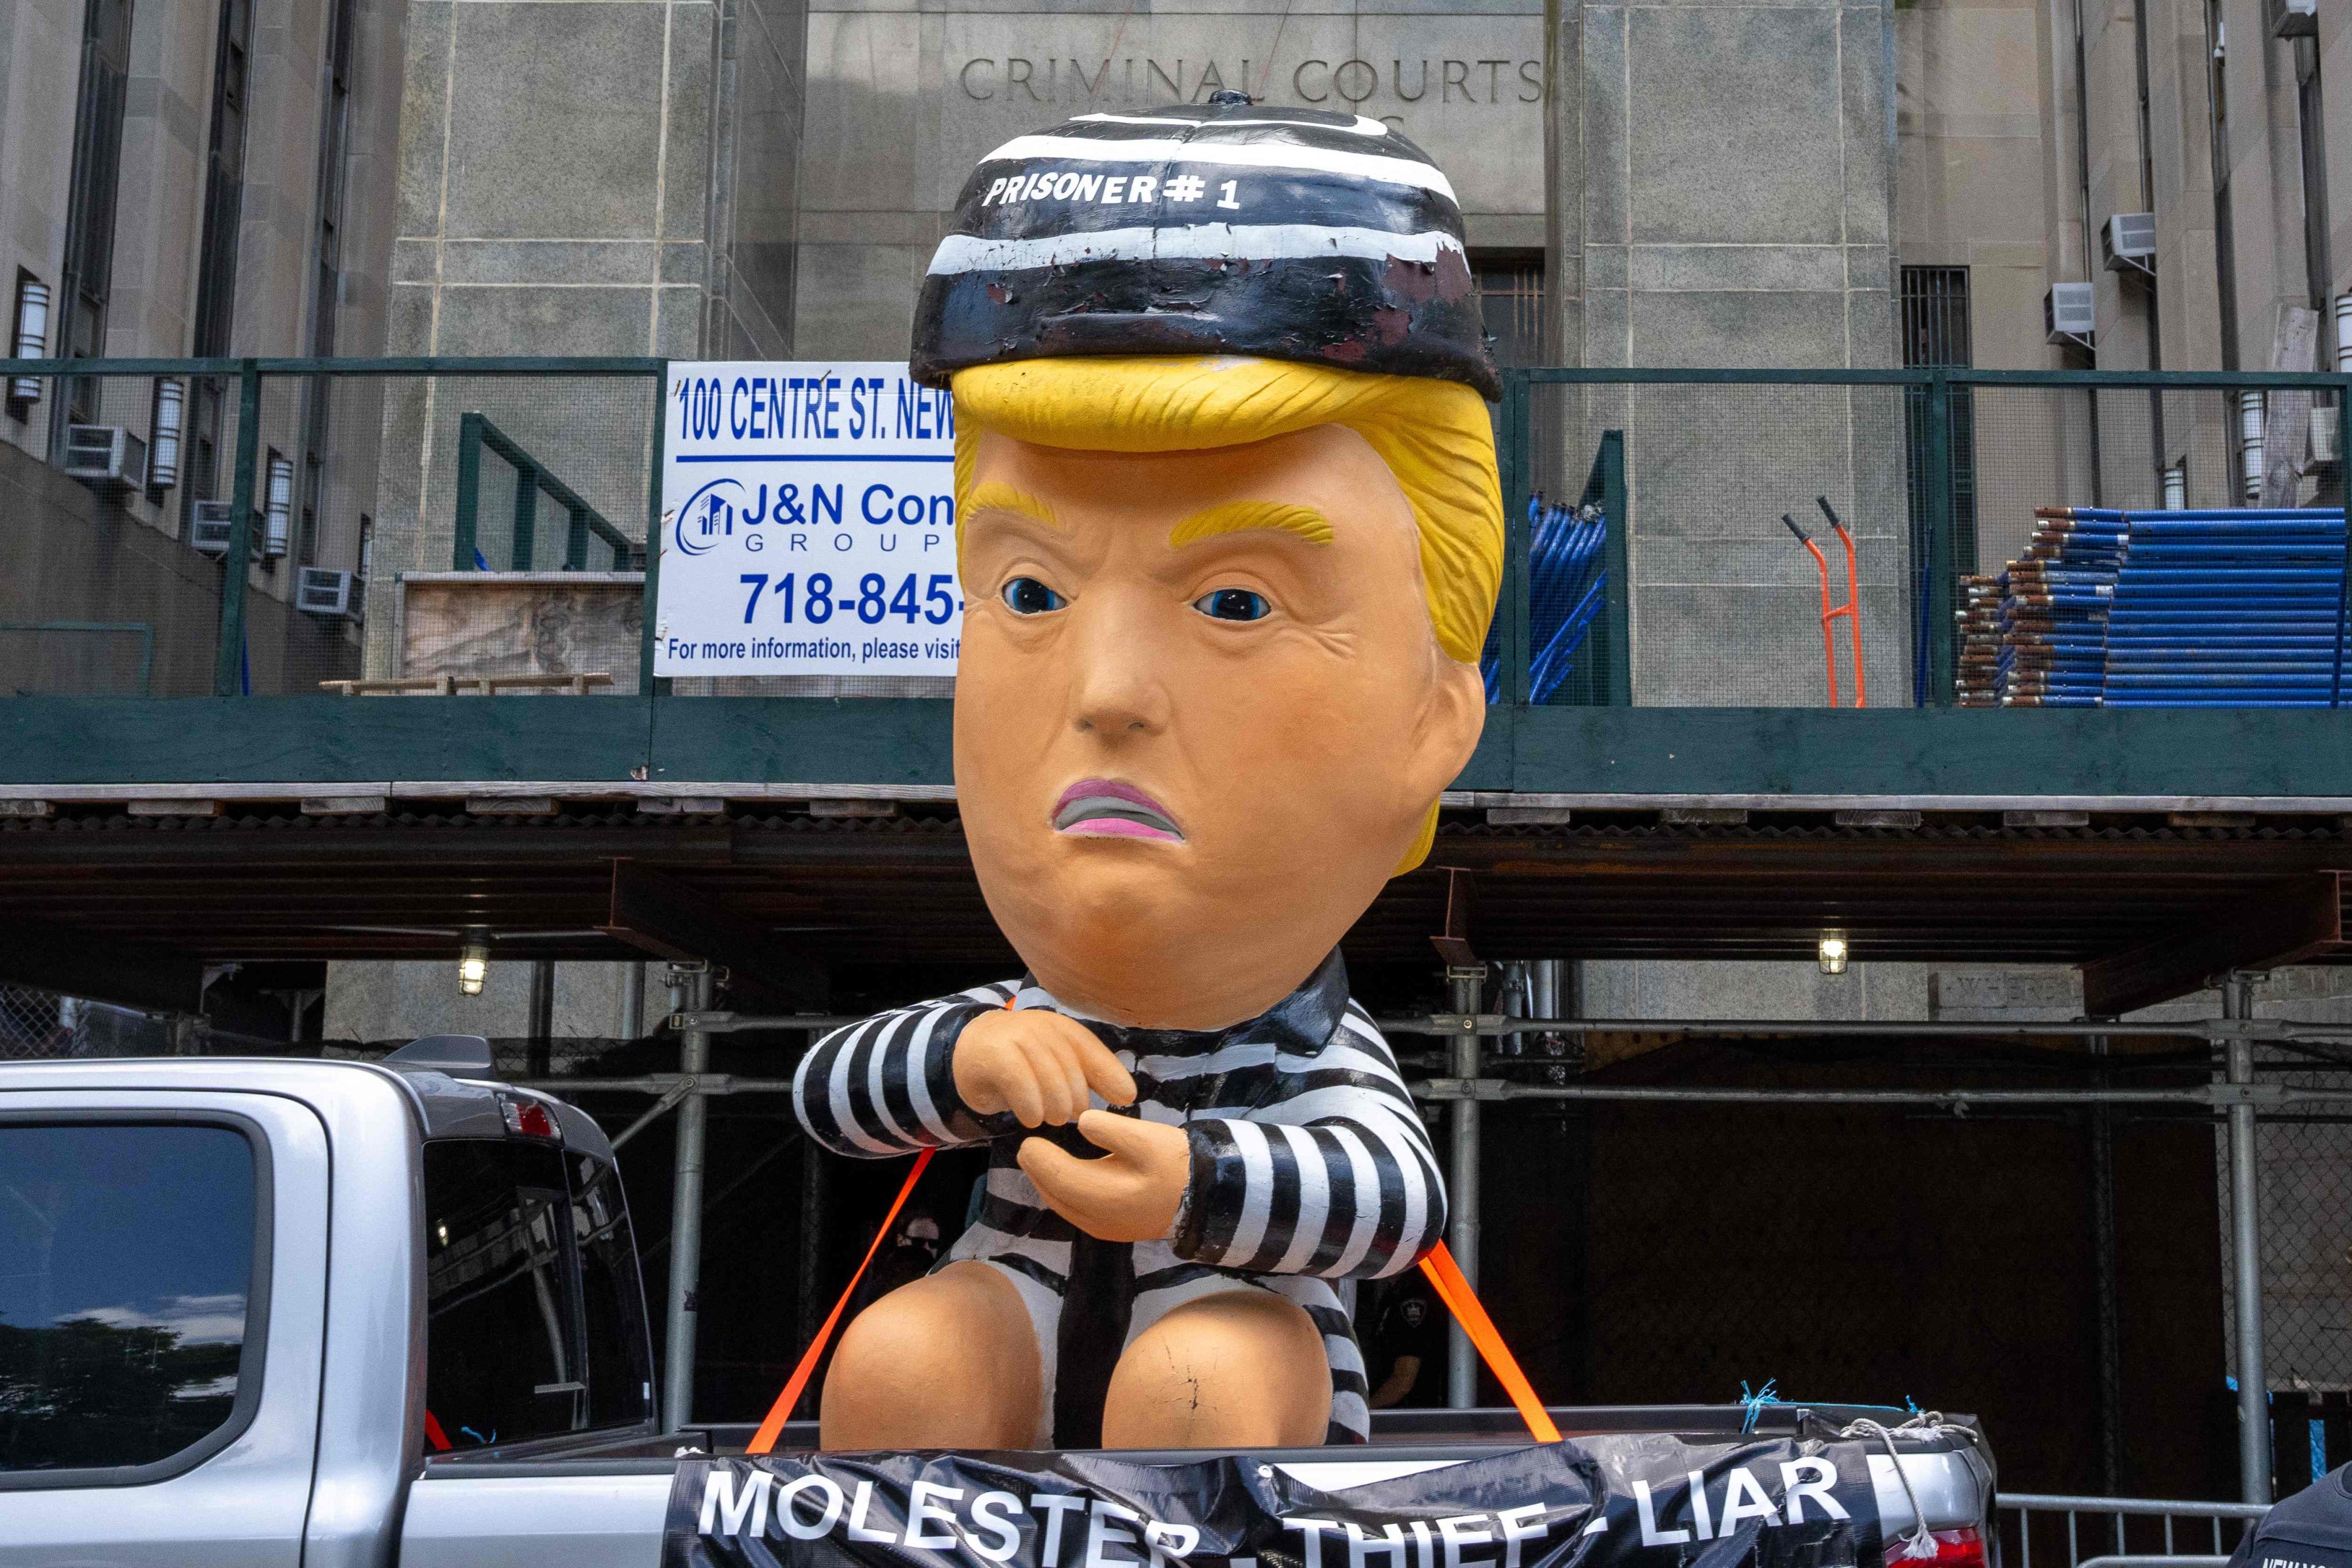 A truck drives by the courthouse with a balloon depicting former US president Donald Trump in a prison garb in New York on Tuesday. Photo: AFP